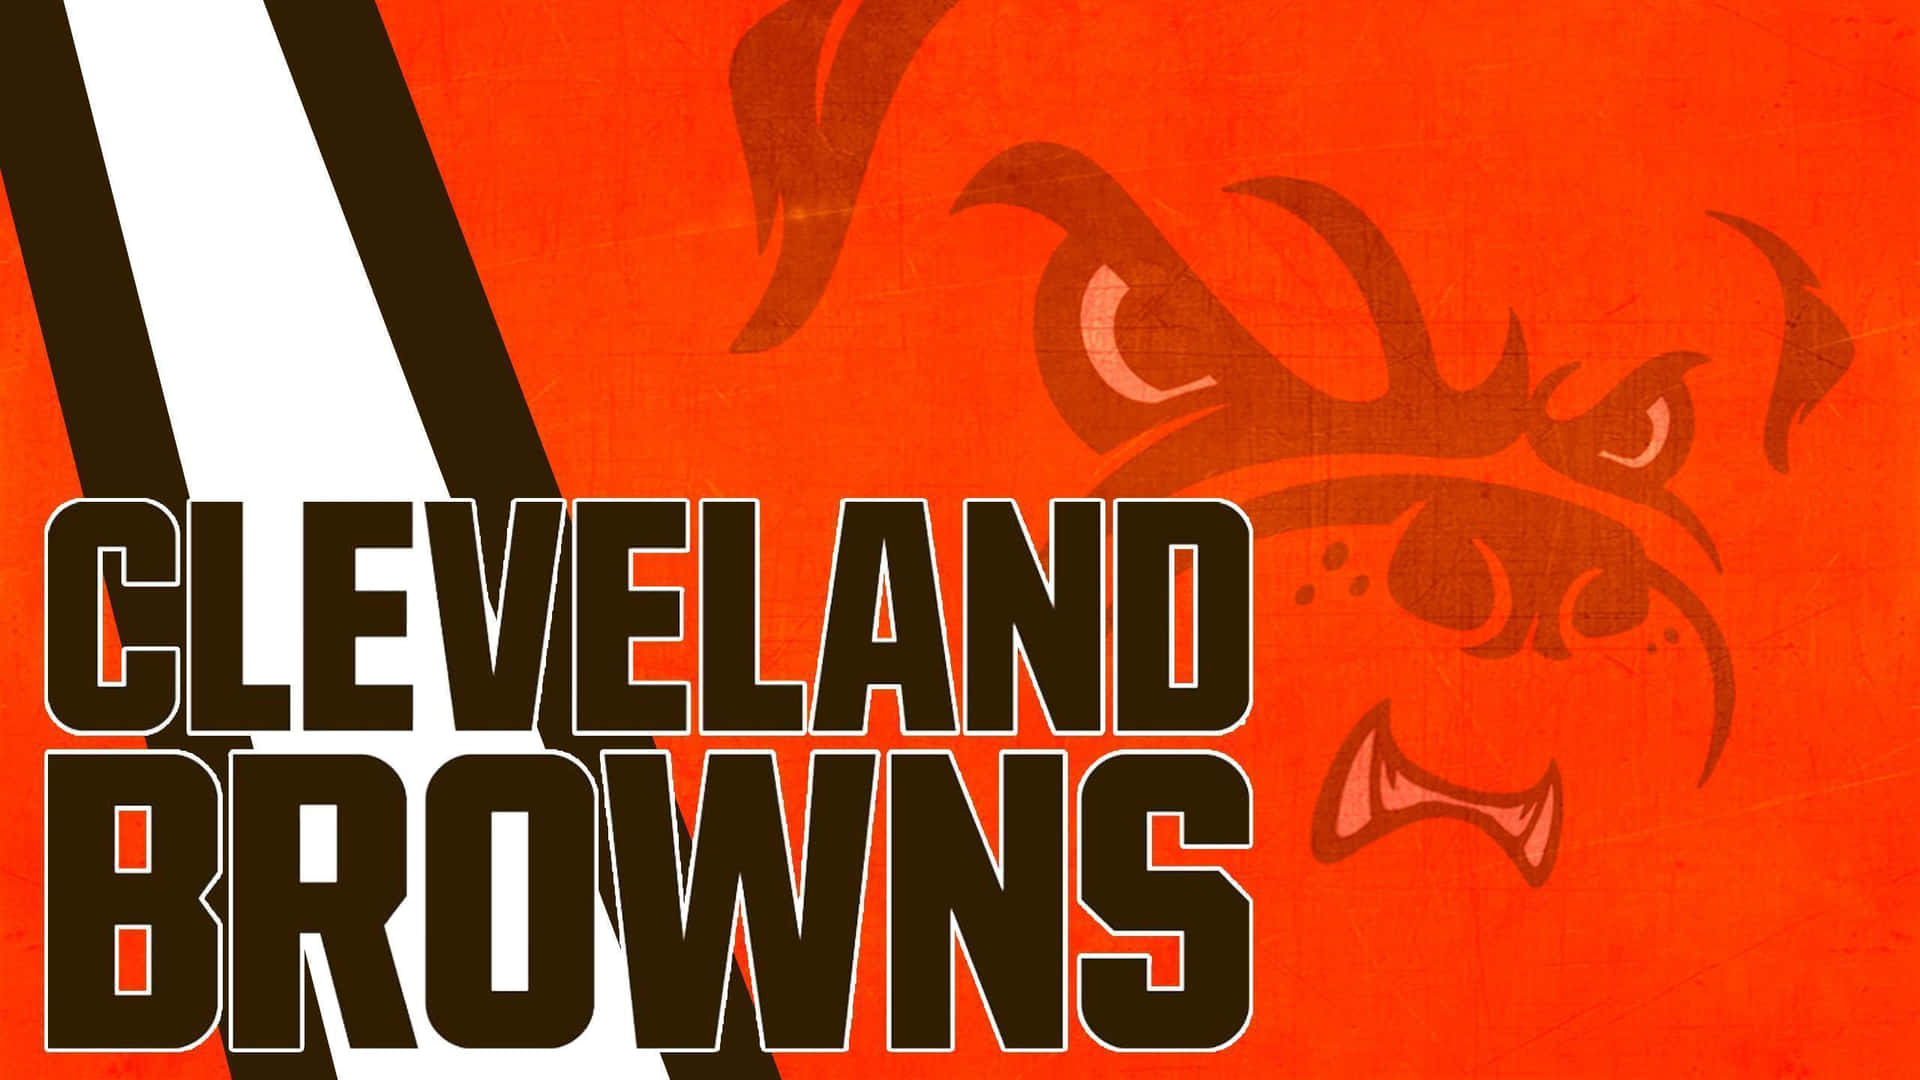 The iconic Cleveland Browns logo. Wallpaper